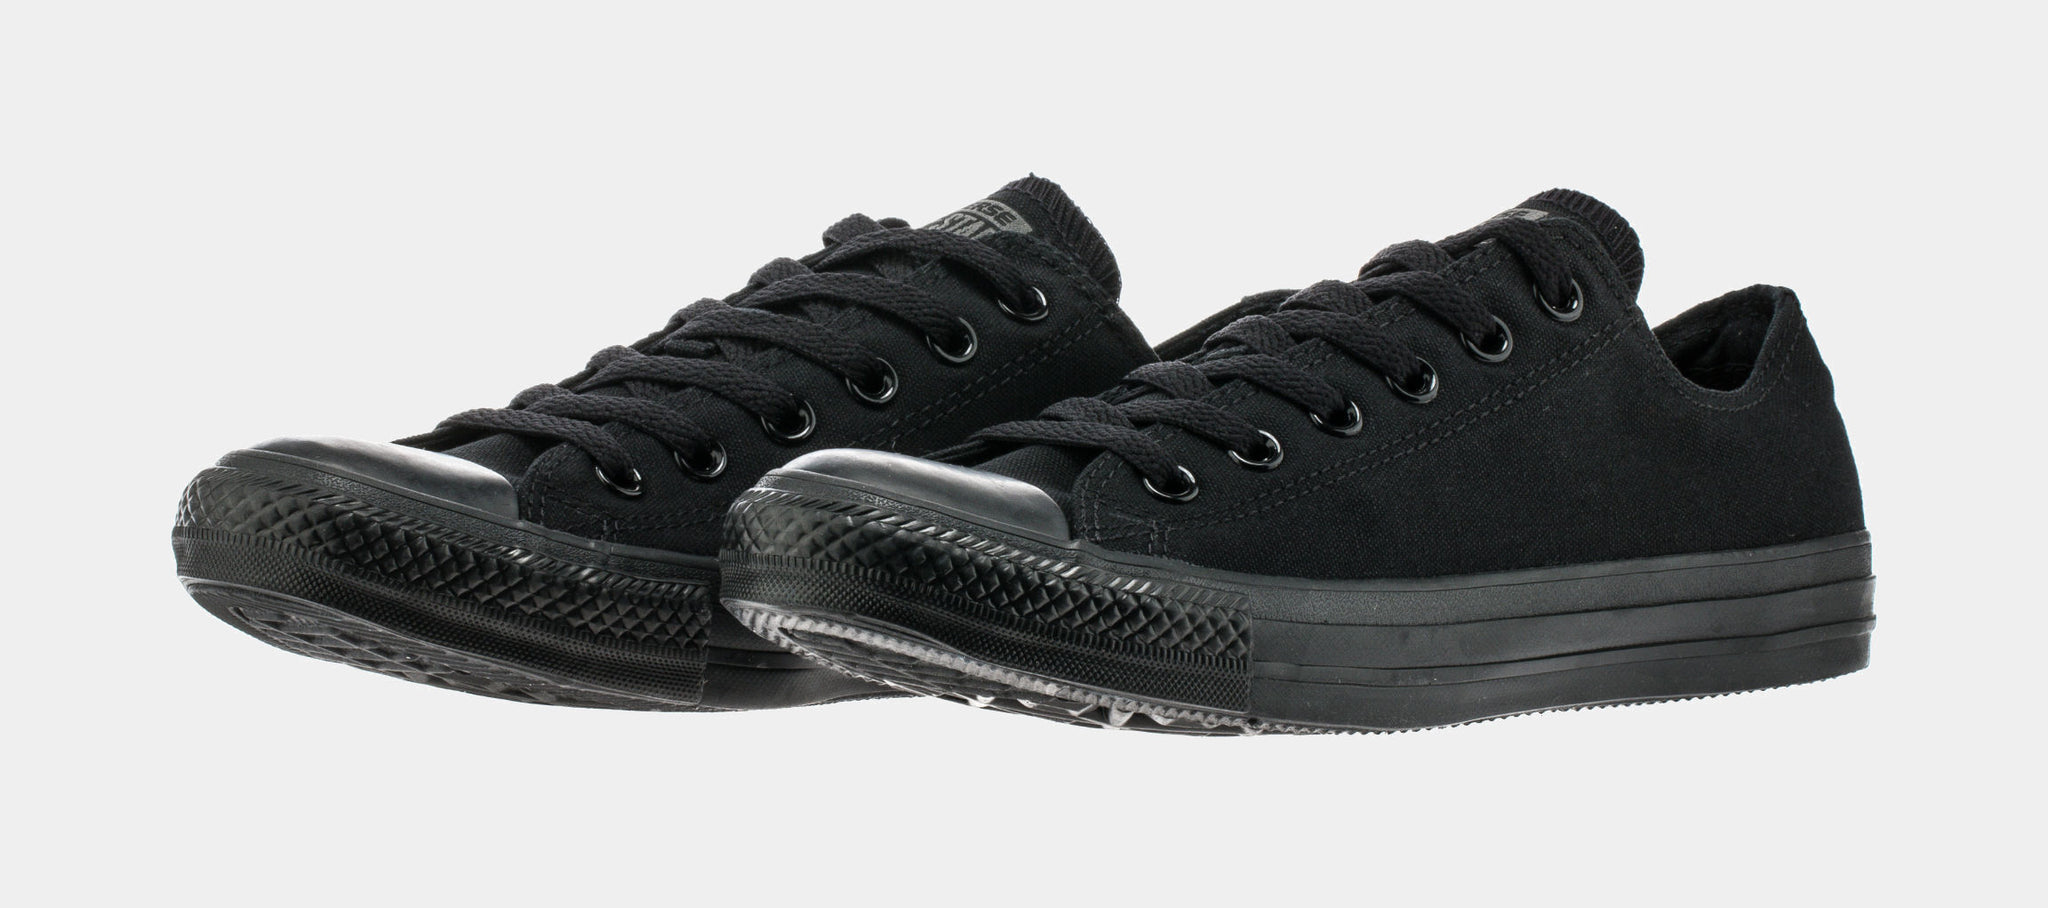 Converse Chuck Taylor All Star Classic Low Solid MonoChrome Canvas Lifestyle Shoe M5039 Shoe Palace